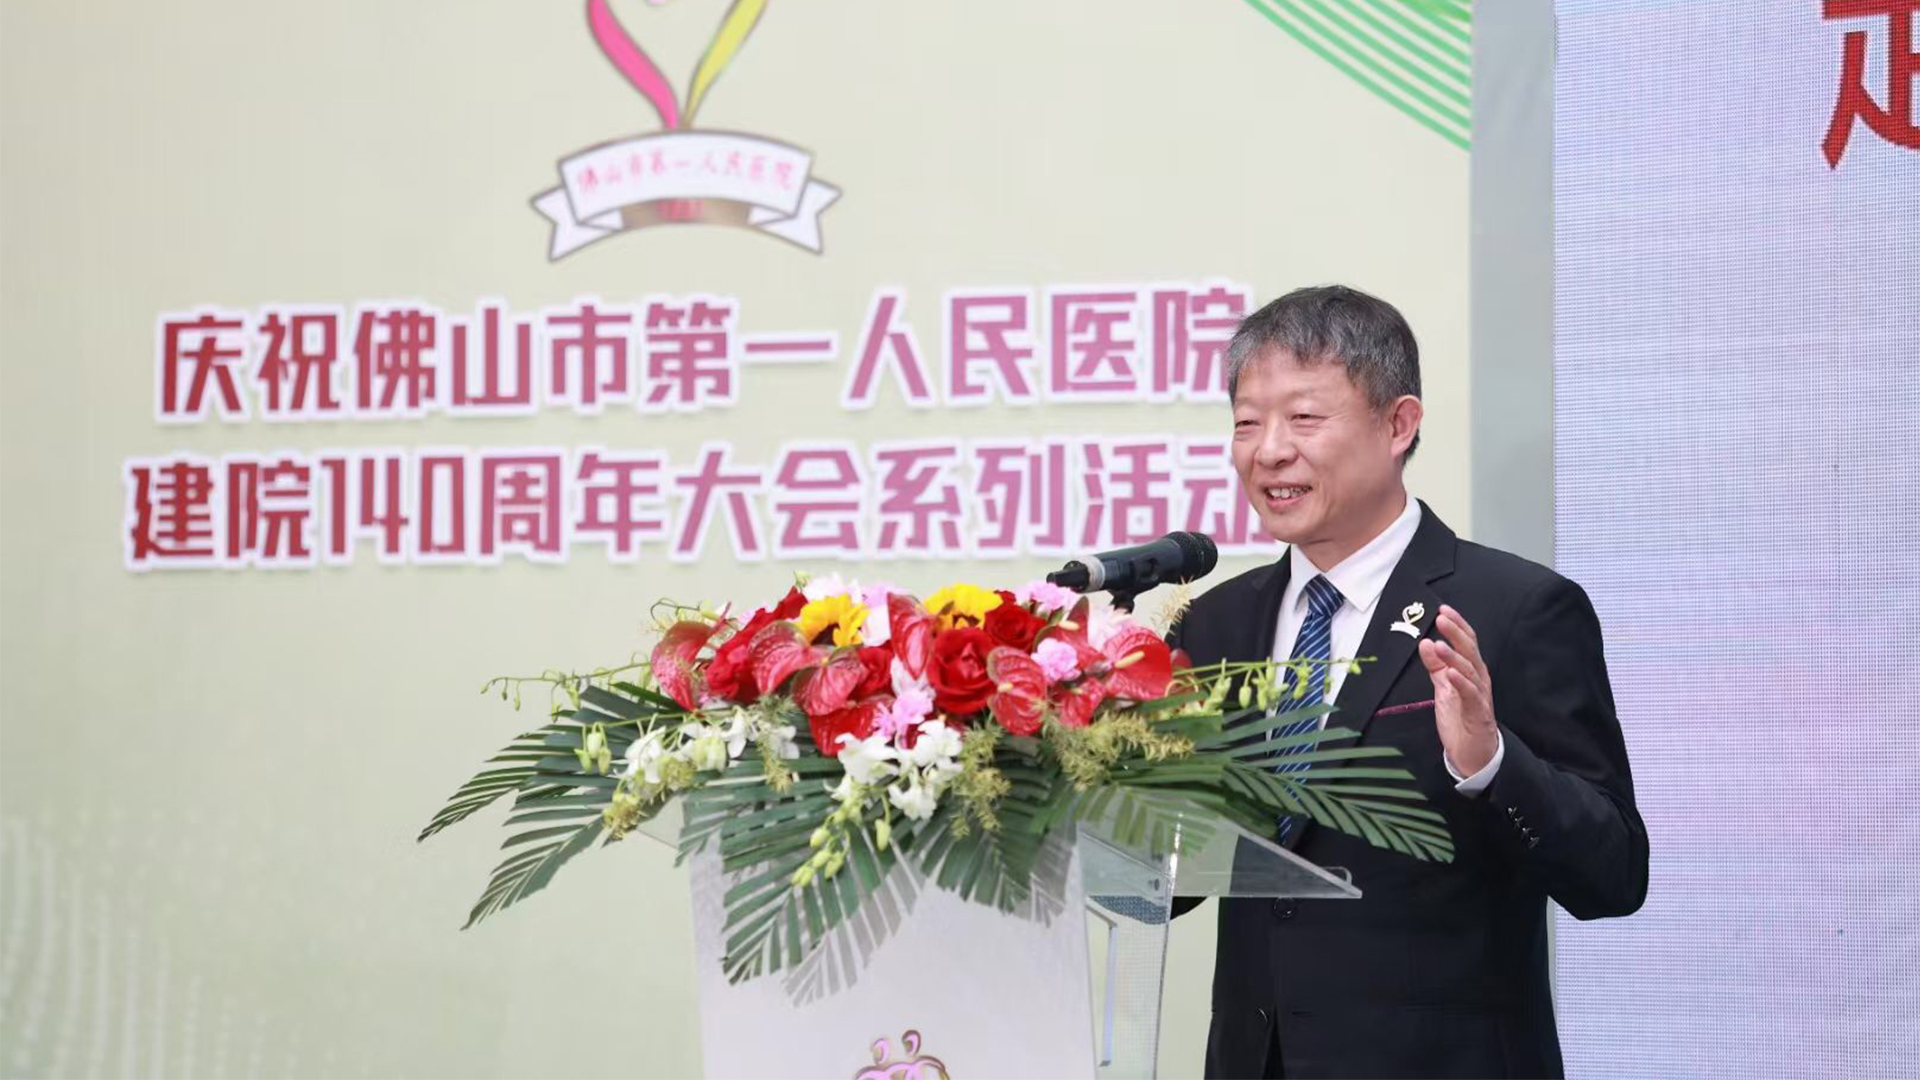 The Grand Opening Event of The Uterine Medical center in Guangzhou Foshan_7